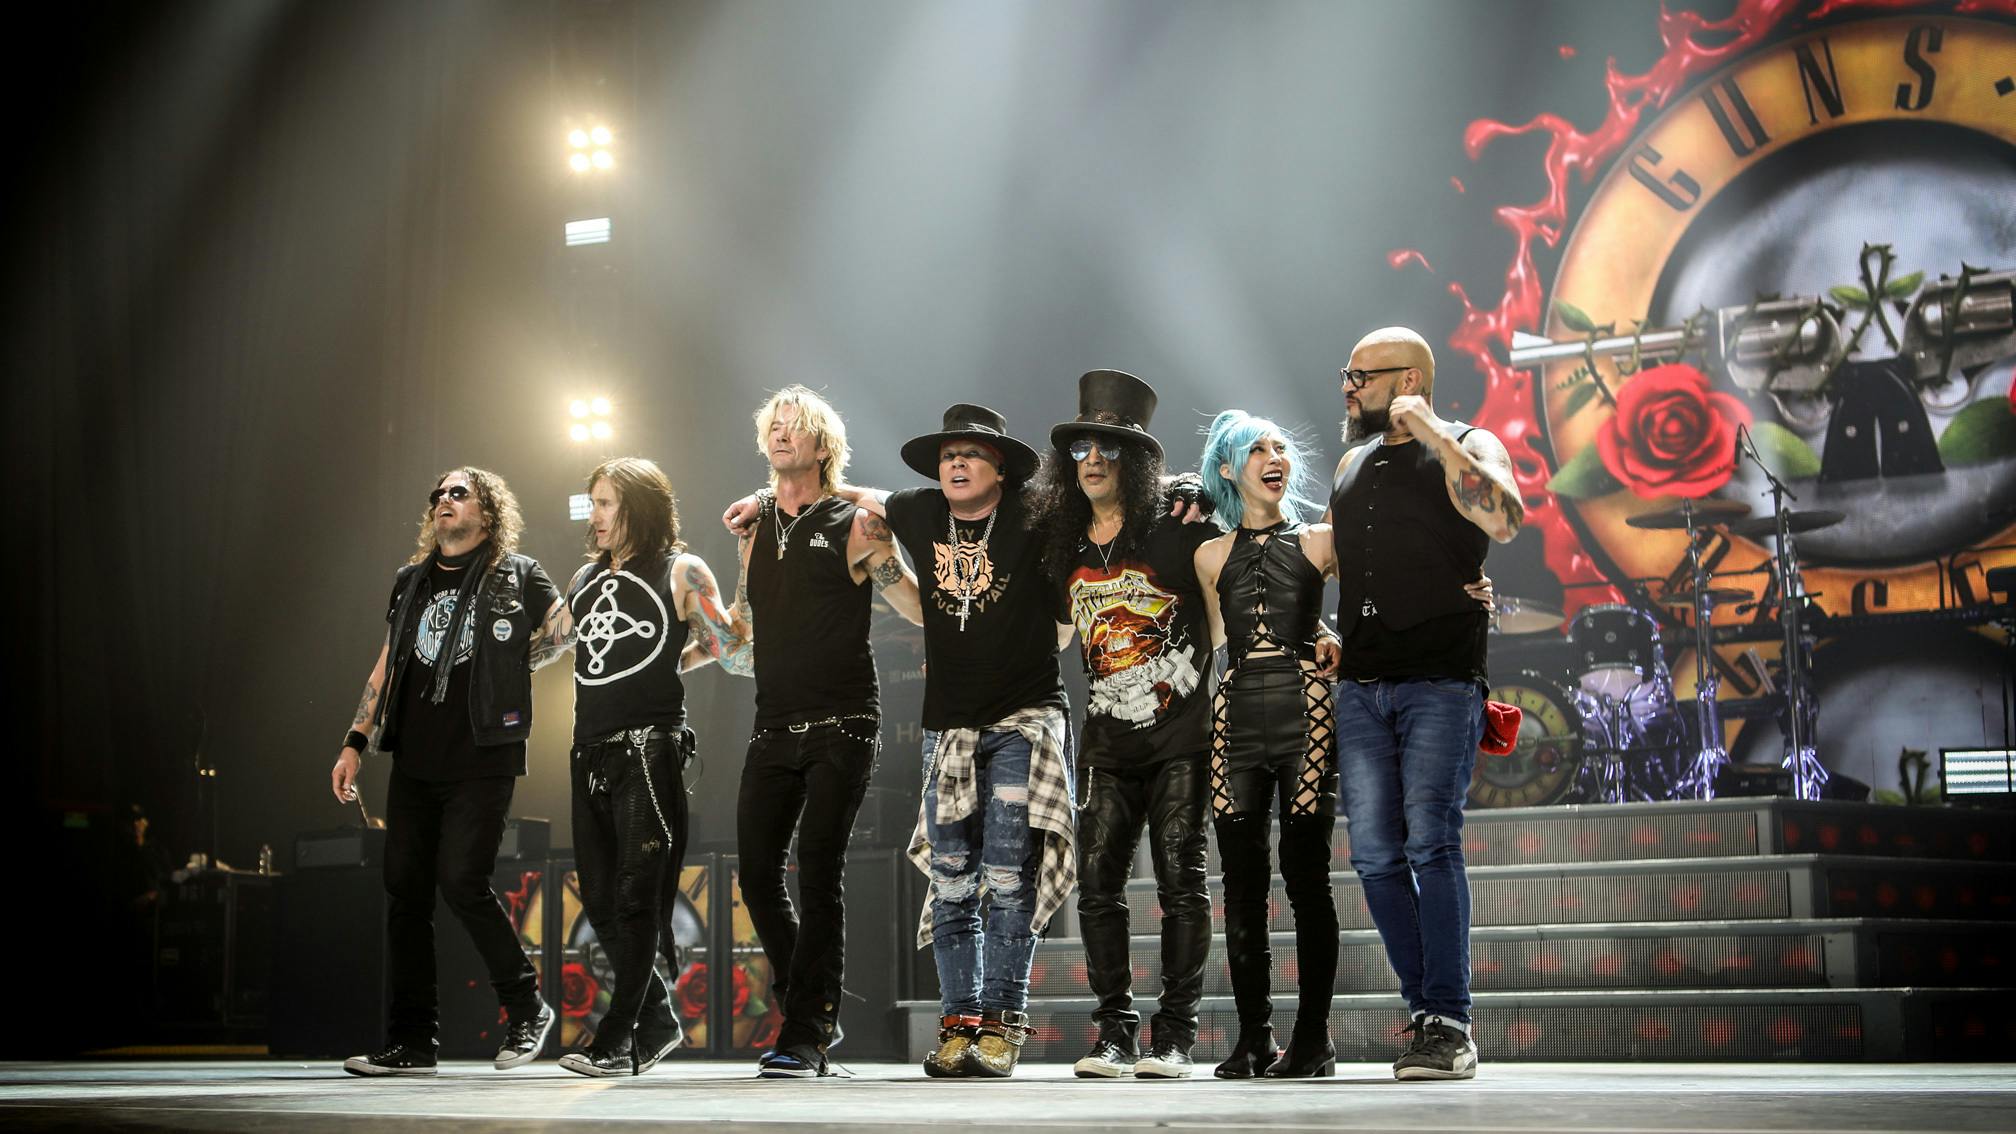 This is Guns N' Roses' setlist from the first night of their U.S. tour